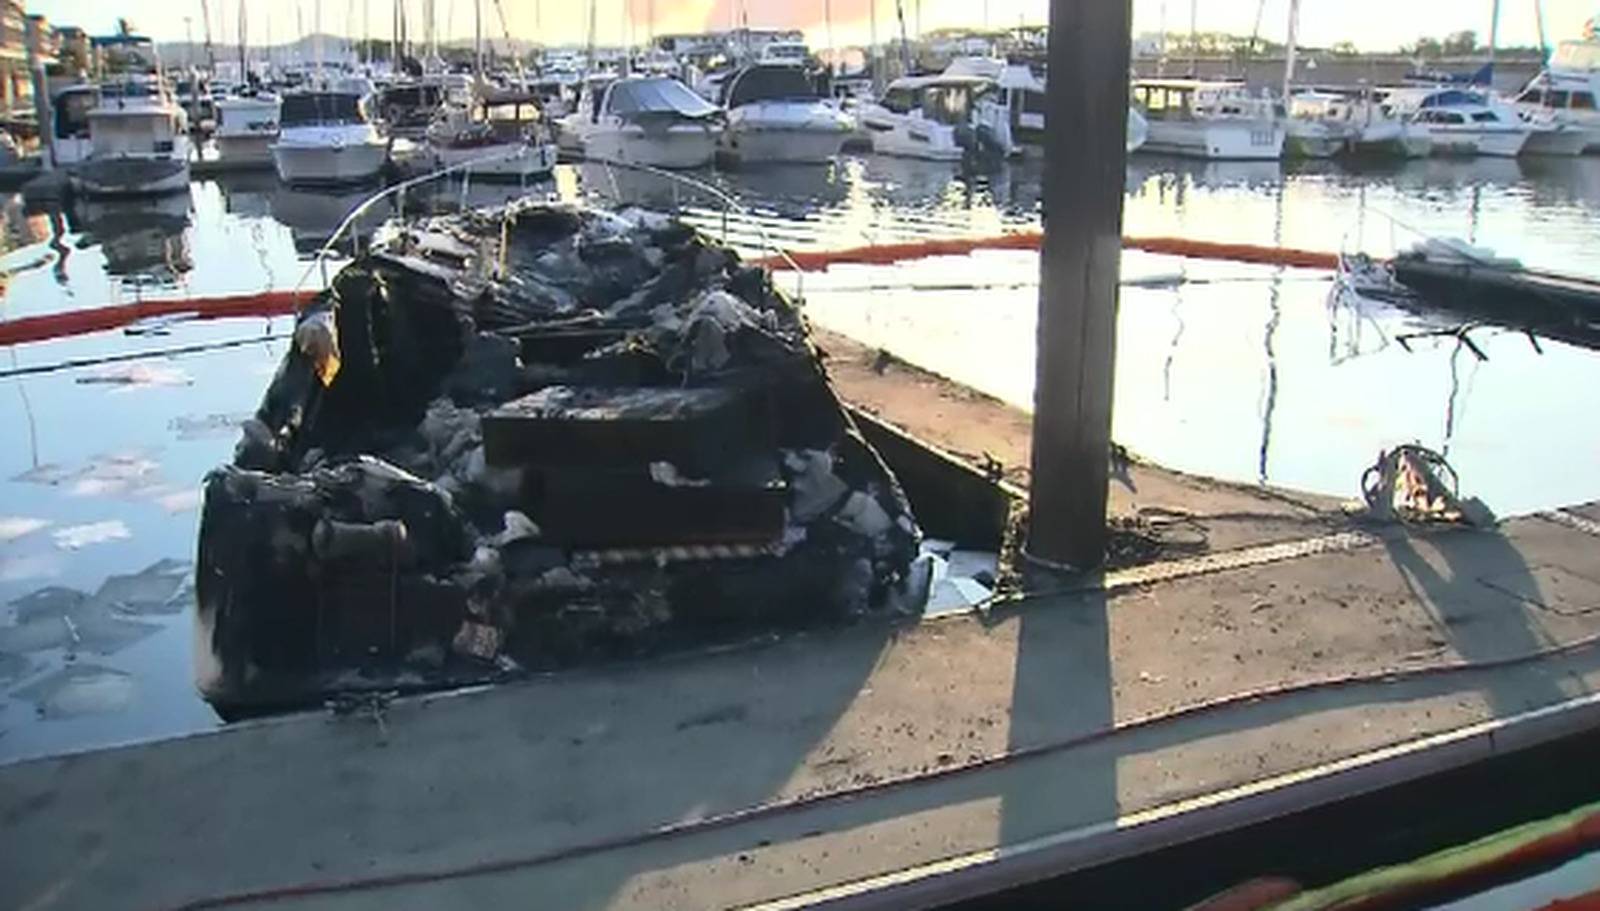 Boat with fire damage